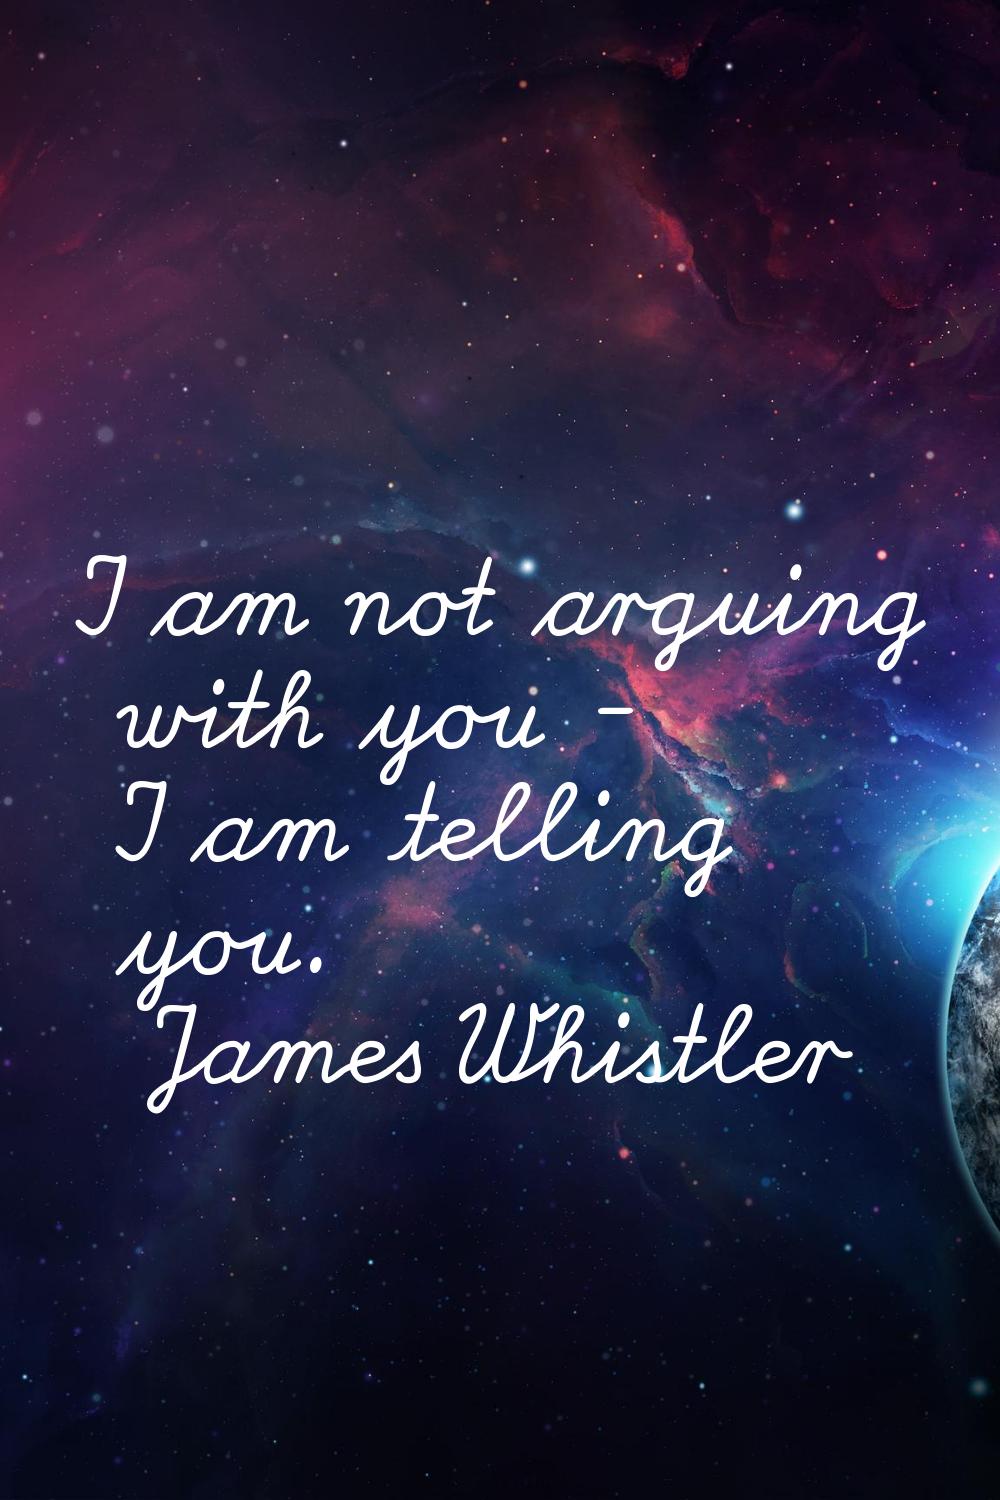 I am not arguing with you - I am telling you.